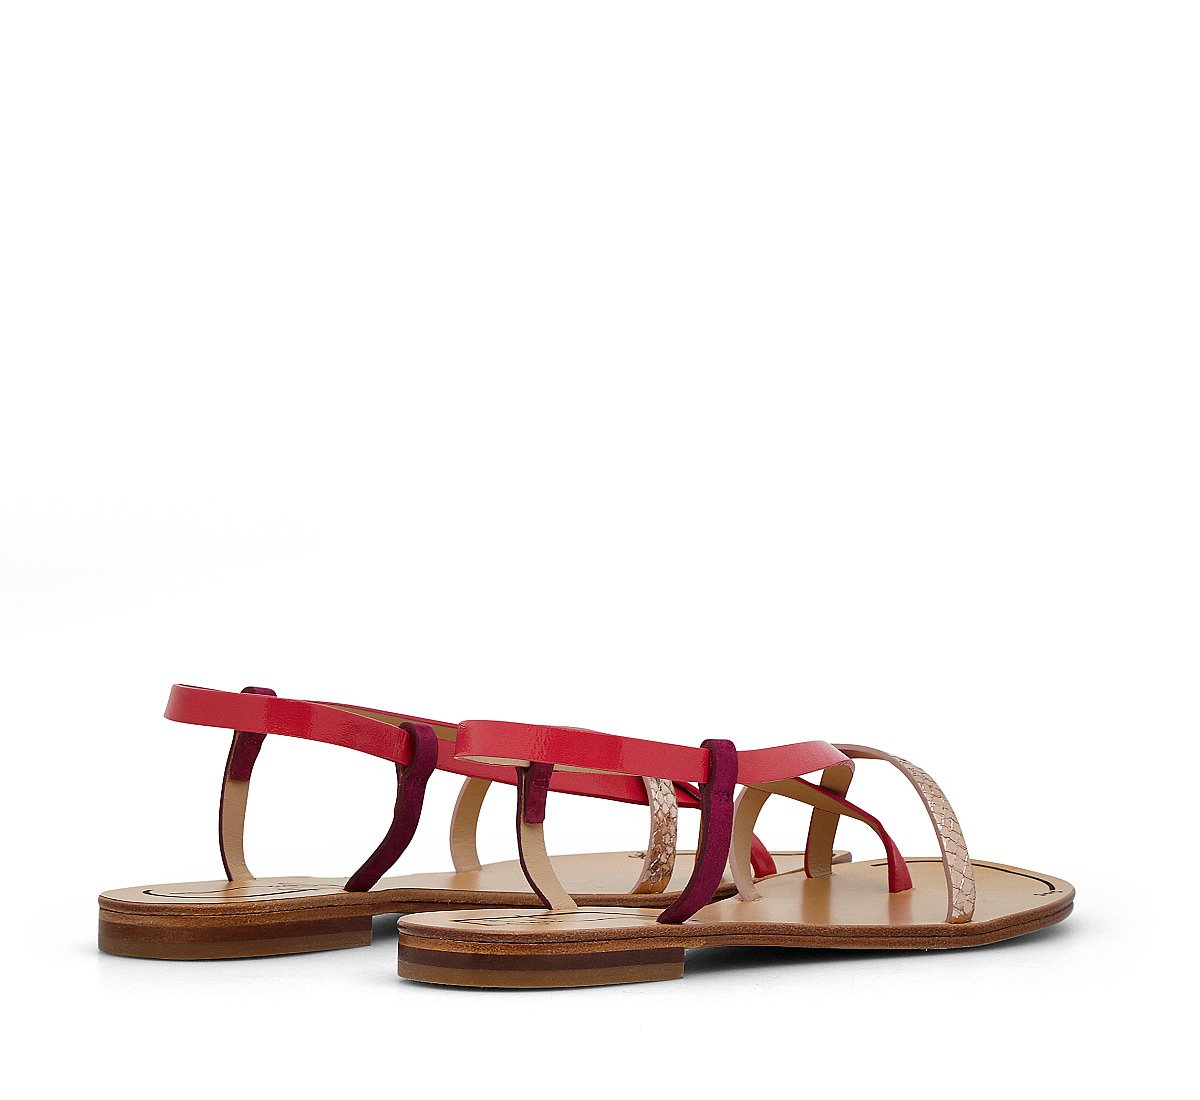 Calfskin and suede sandals